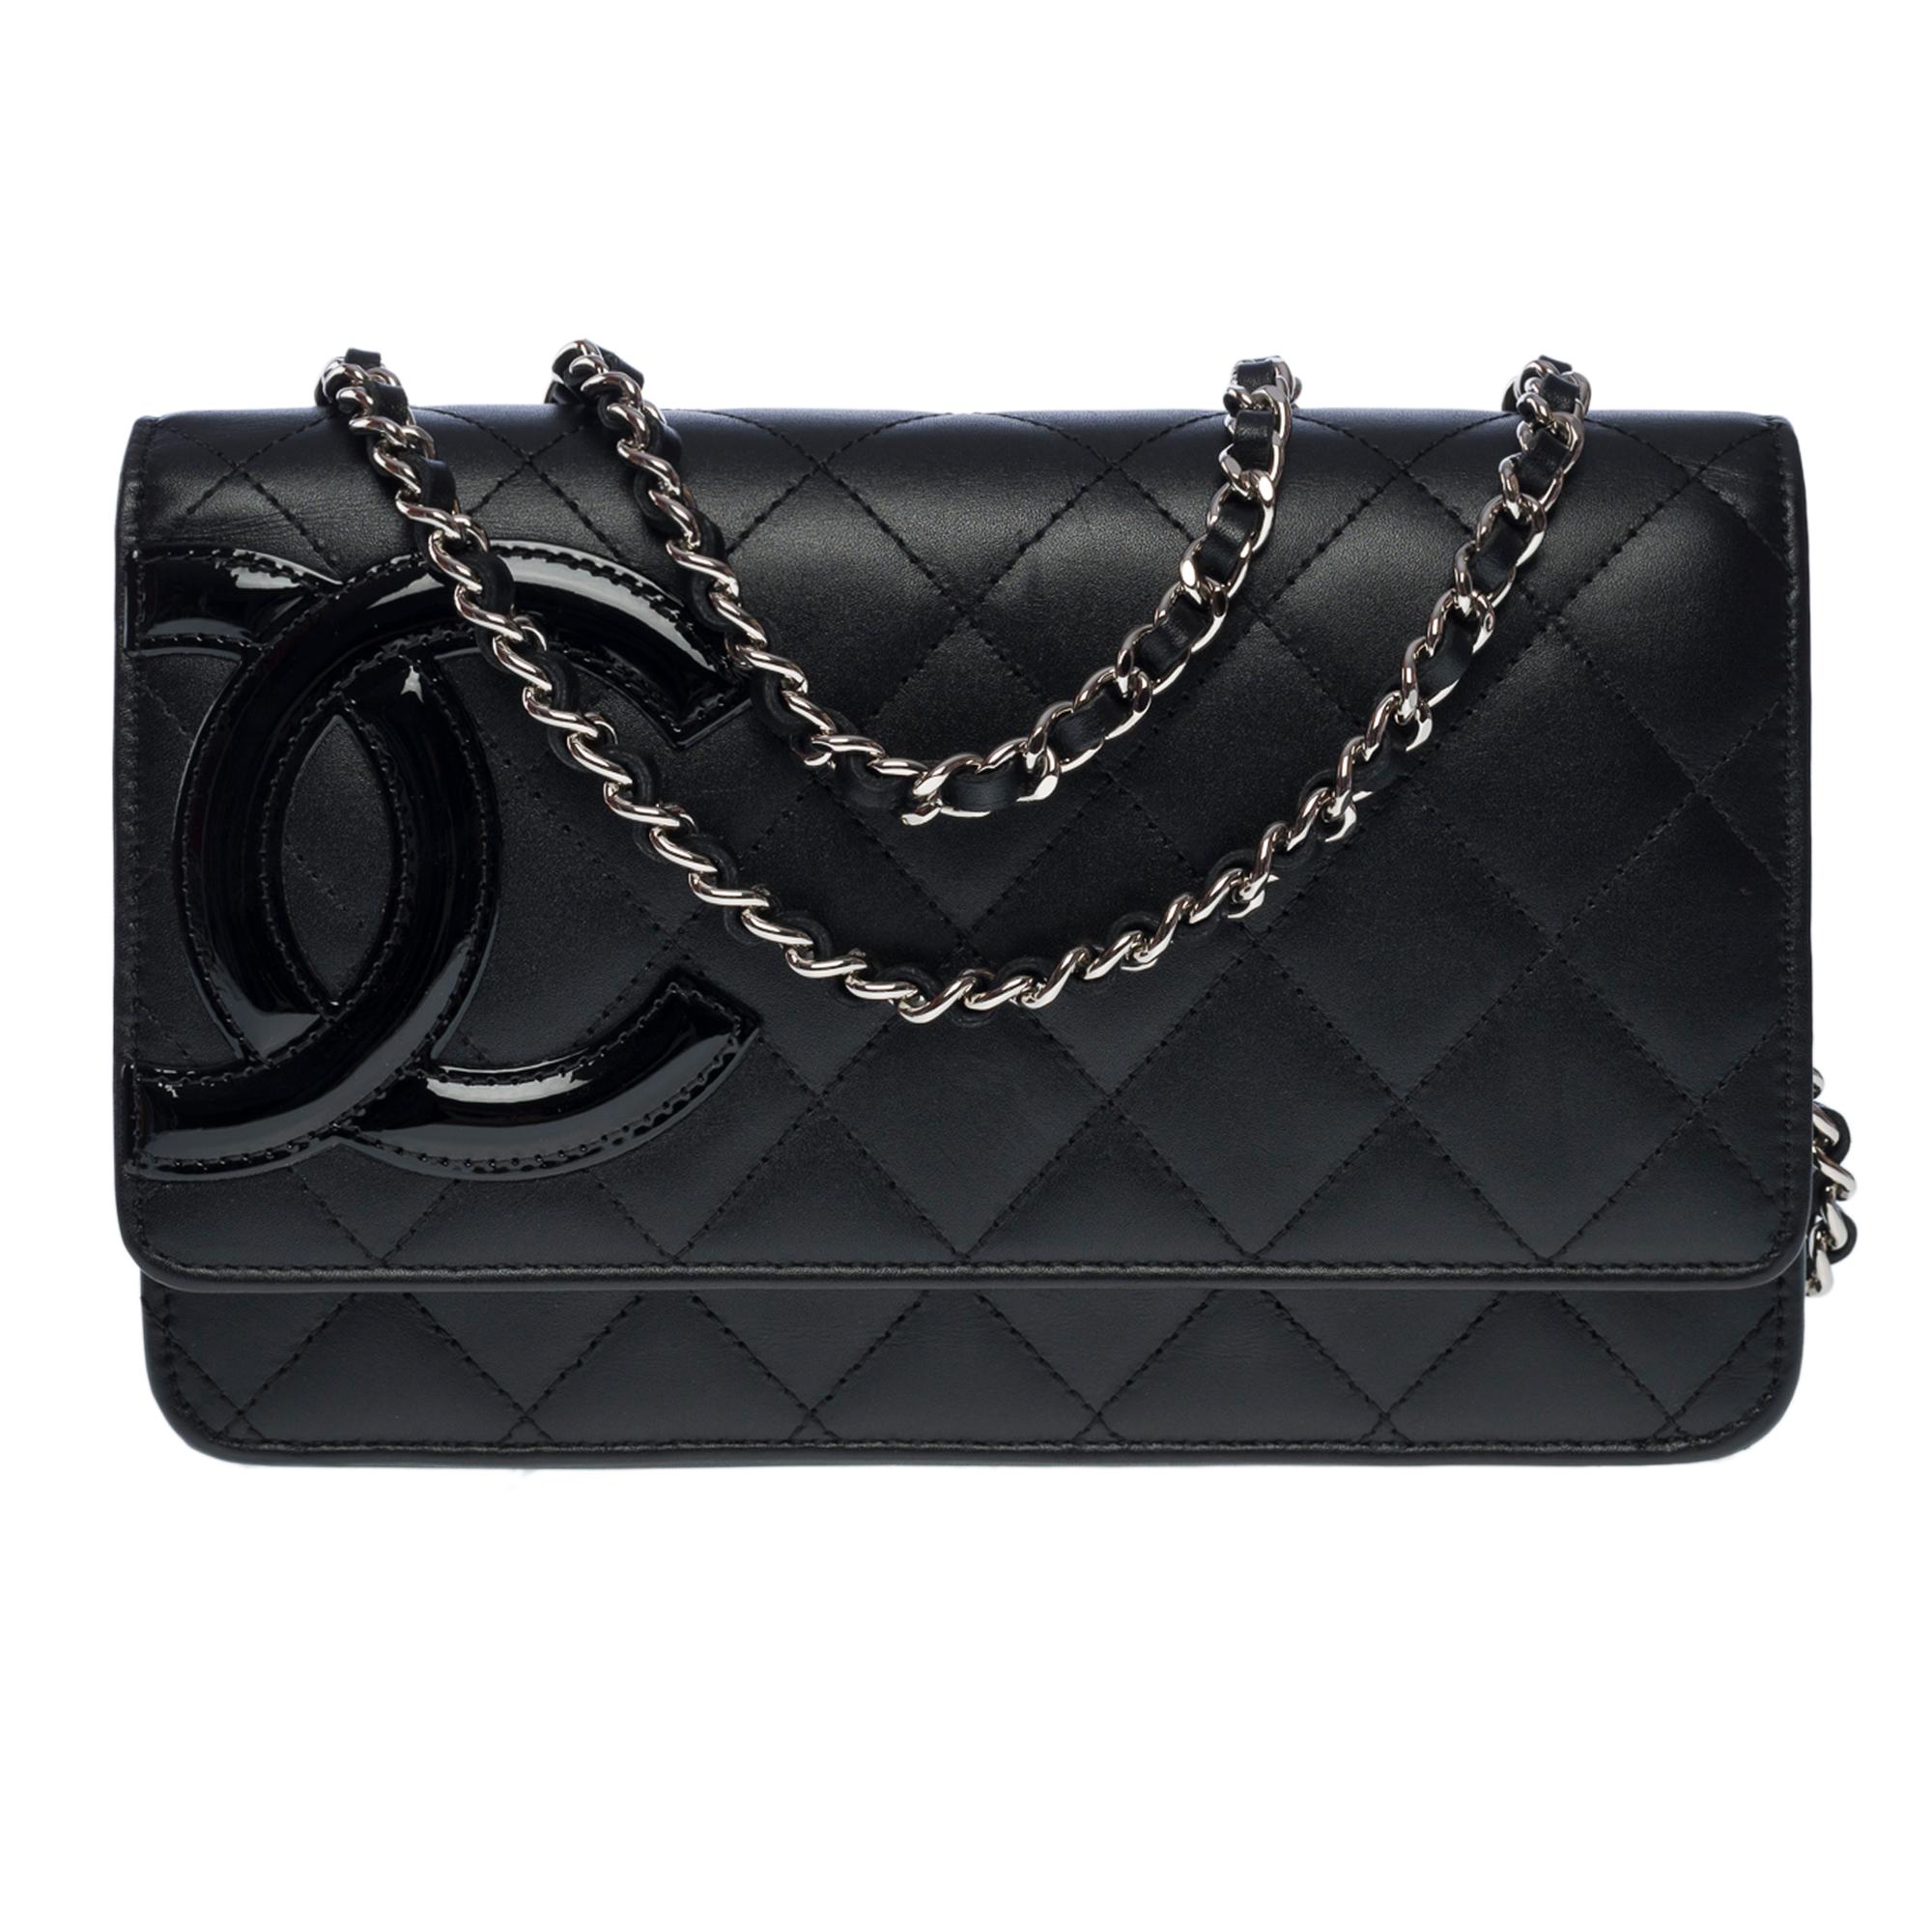 Stunning Chanel Wallet On Chain (WOC) Cambon limited edition in black quilted leather with CC in topstitched black patent leather, silver metal hardware, a silver metal chain handle interwoven with black leather for a shoulder and crossbody